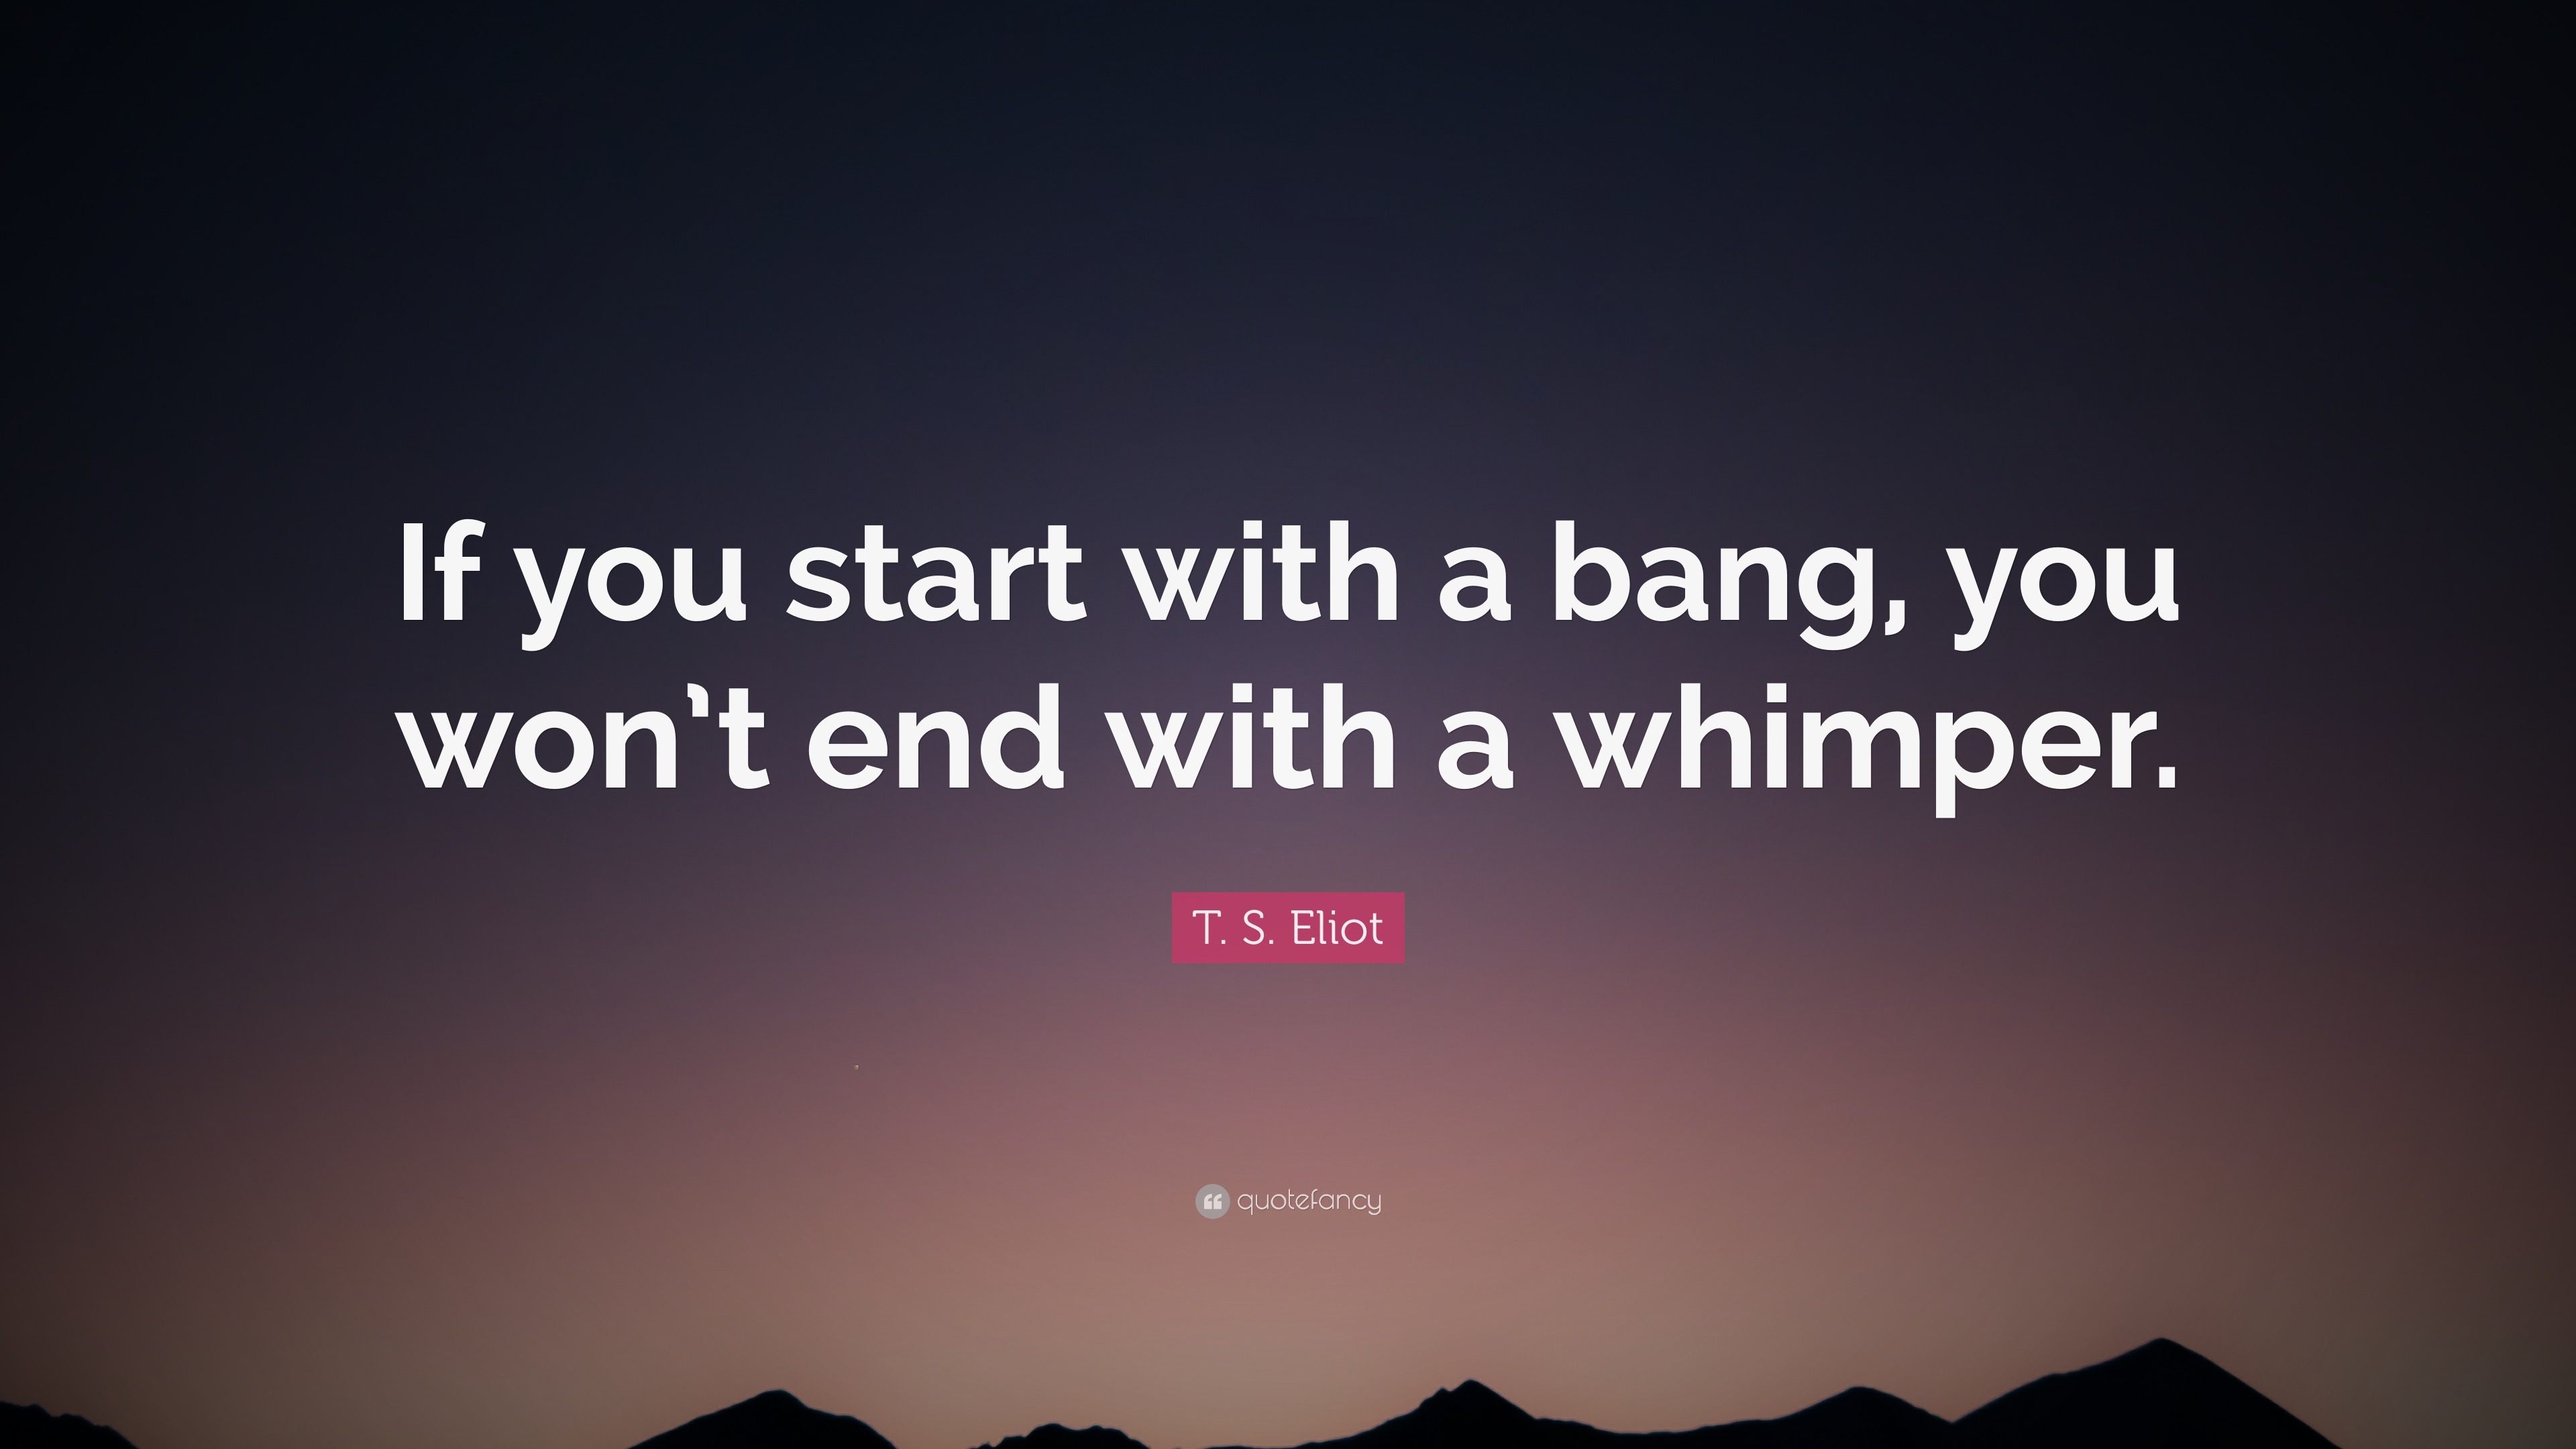 T S Eliot Quote “if You Start With A Bang You Wont End With A Whimper” 5833